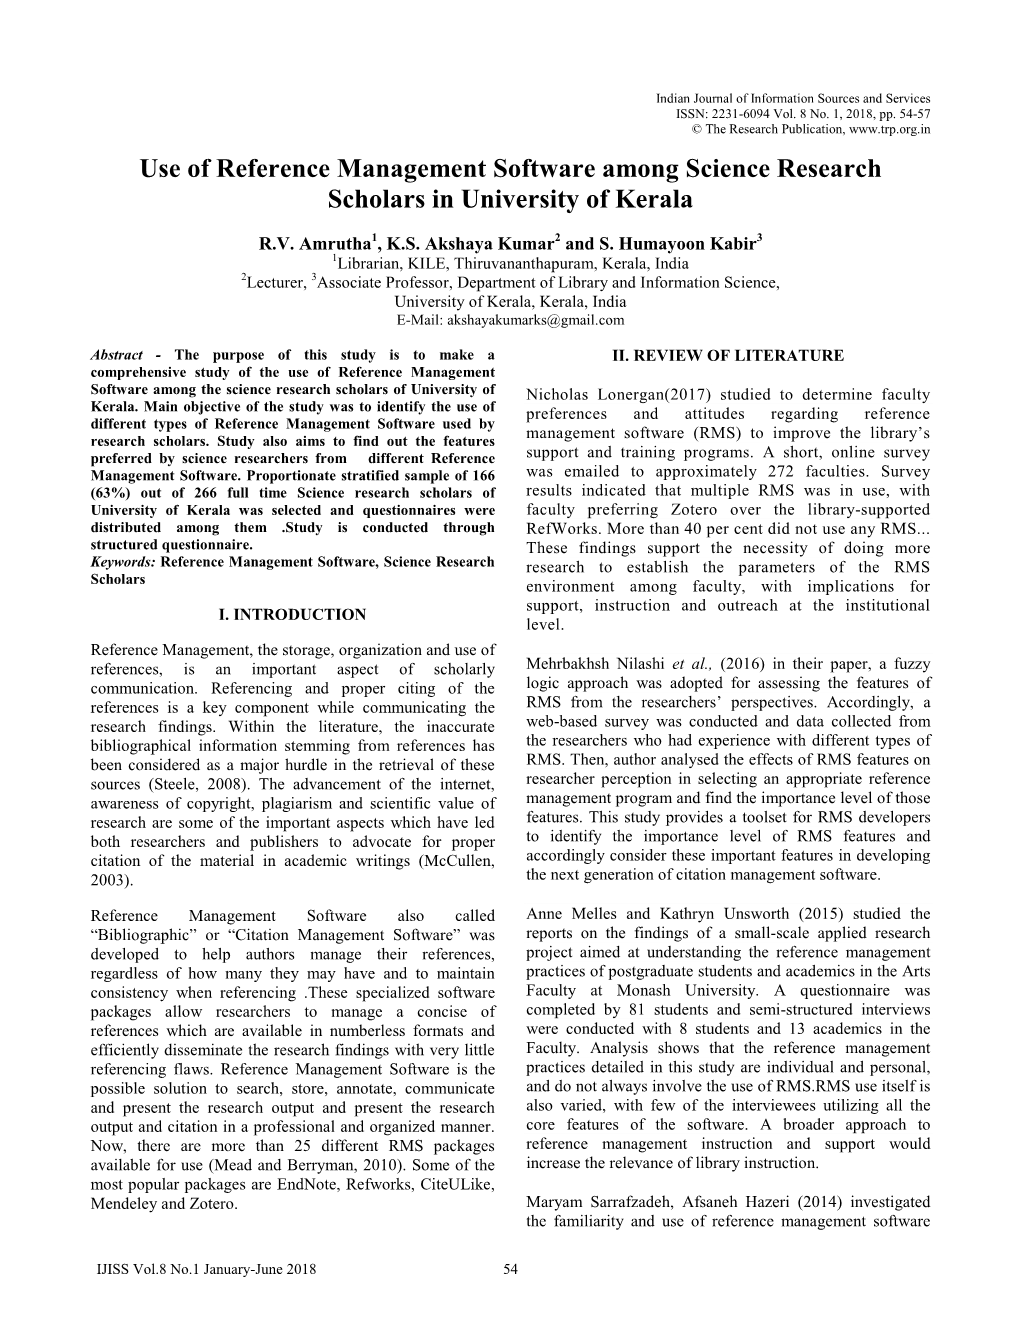 Use of Reference Management Software Among Science Research Scholars in University of Kerala